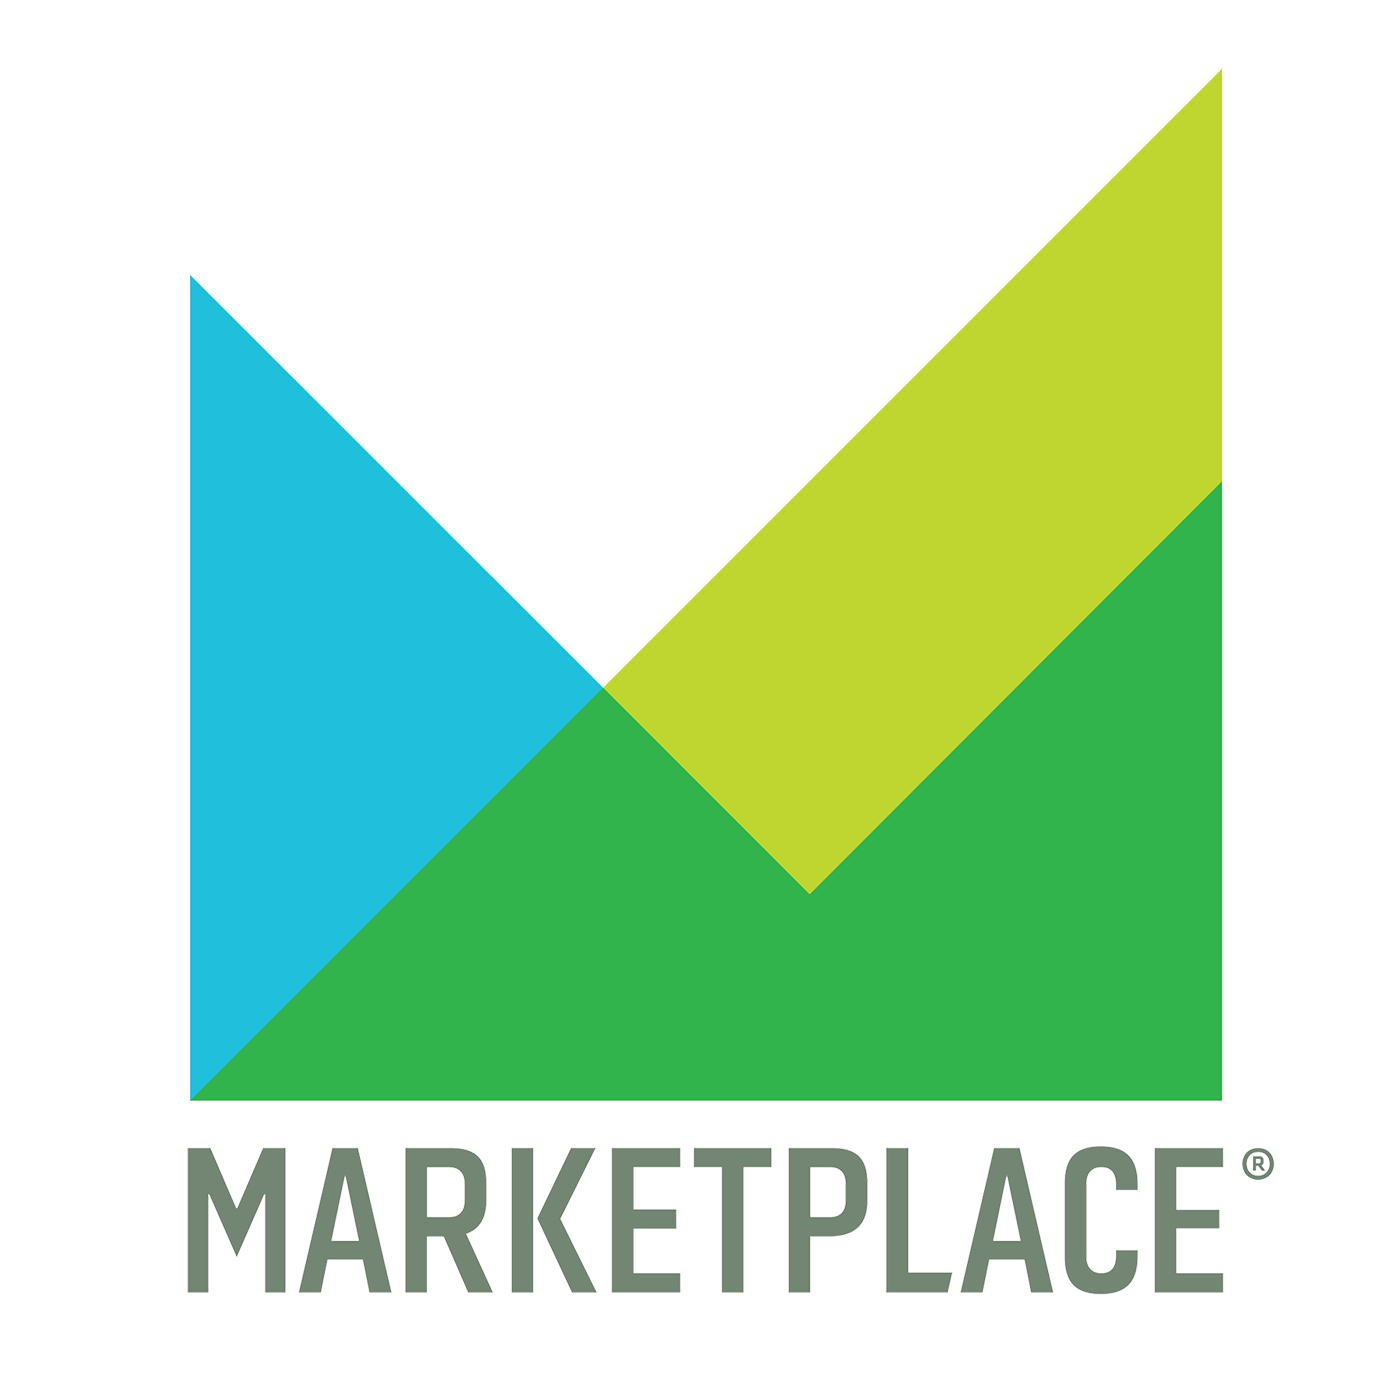 Gretchen Blough Discusses New Tariffs on Marketplace Podcast